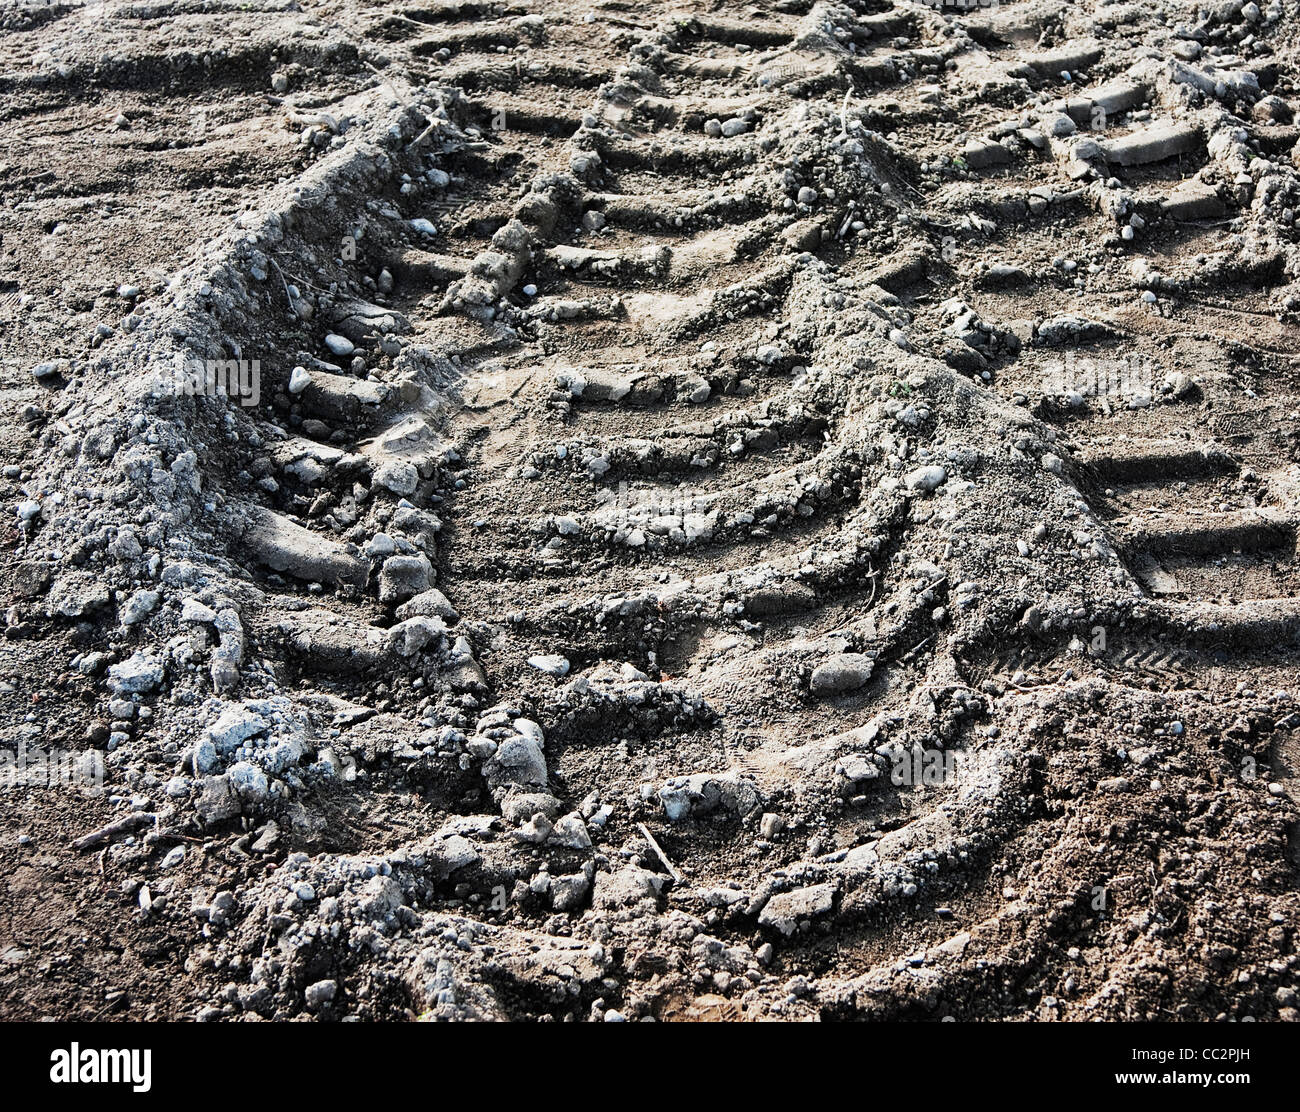 truck tire tracks in dirt at construction site Stock Photo